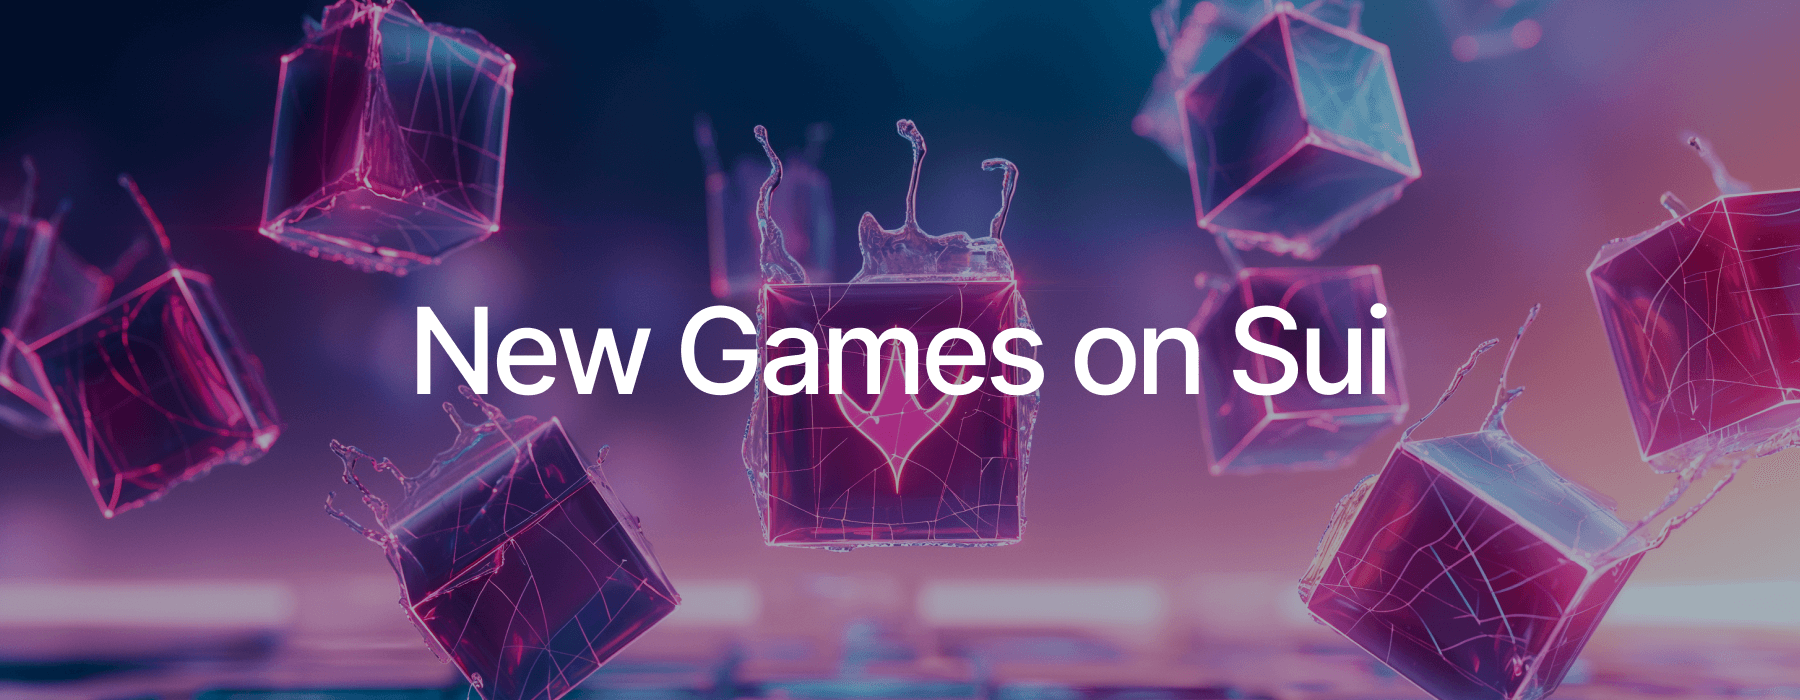 Five New Games Coming to Sui Blockchain